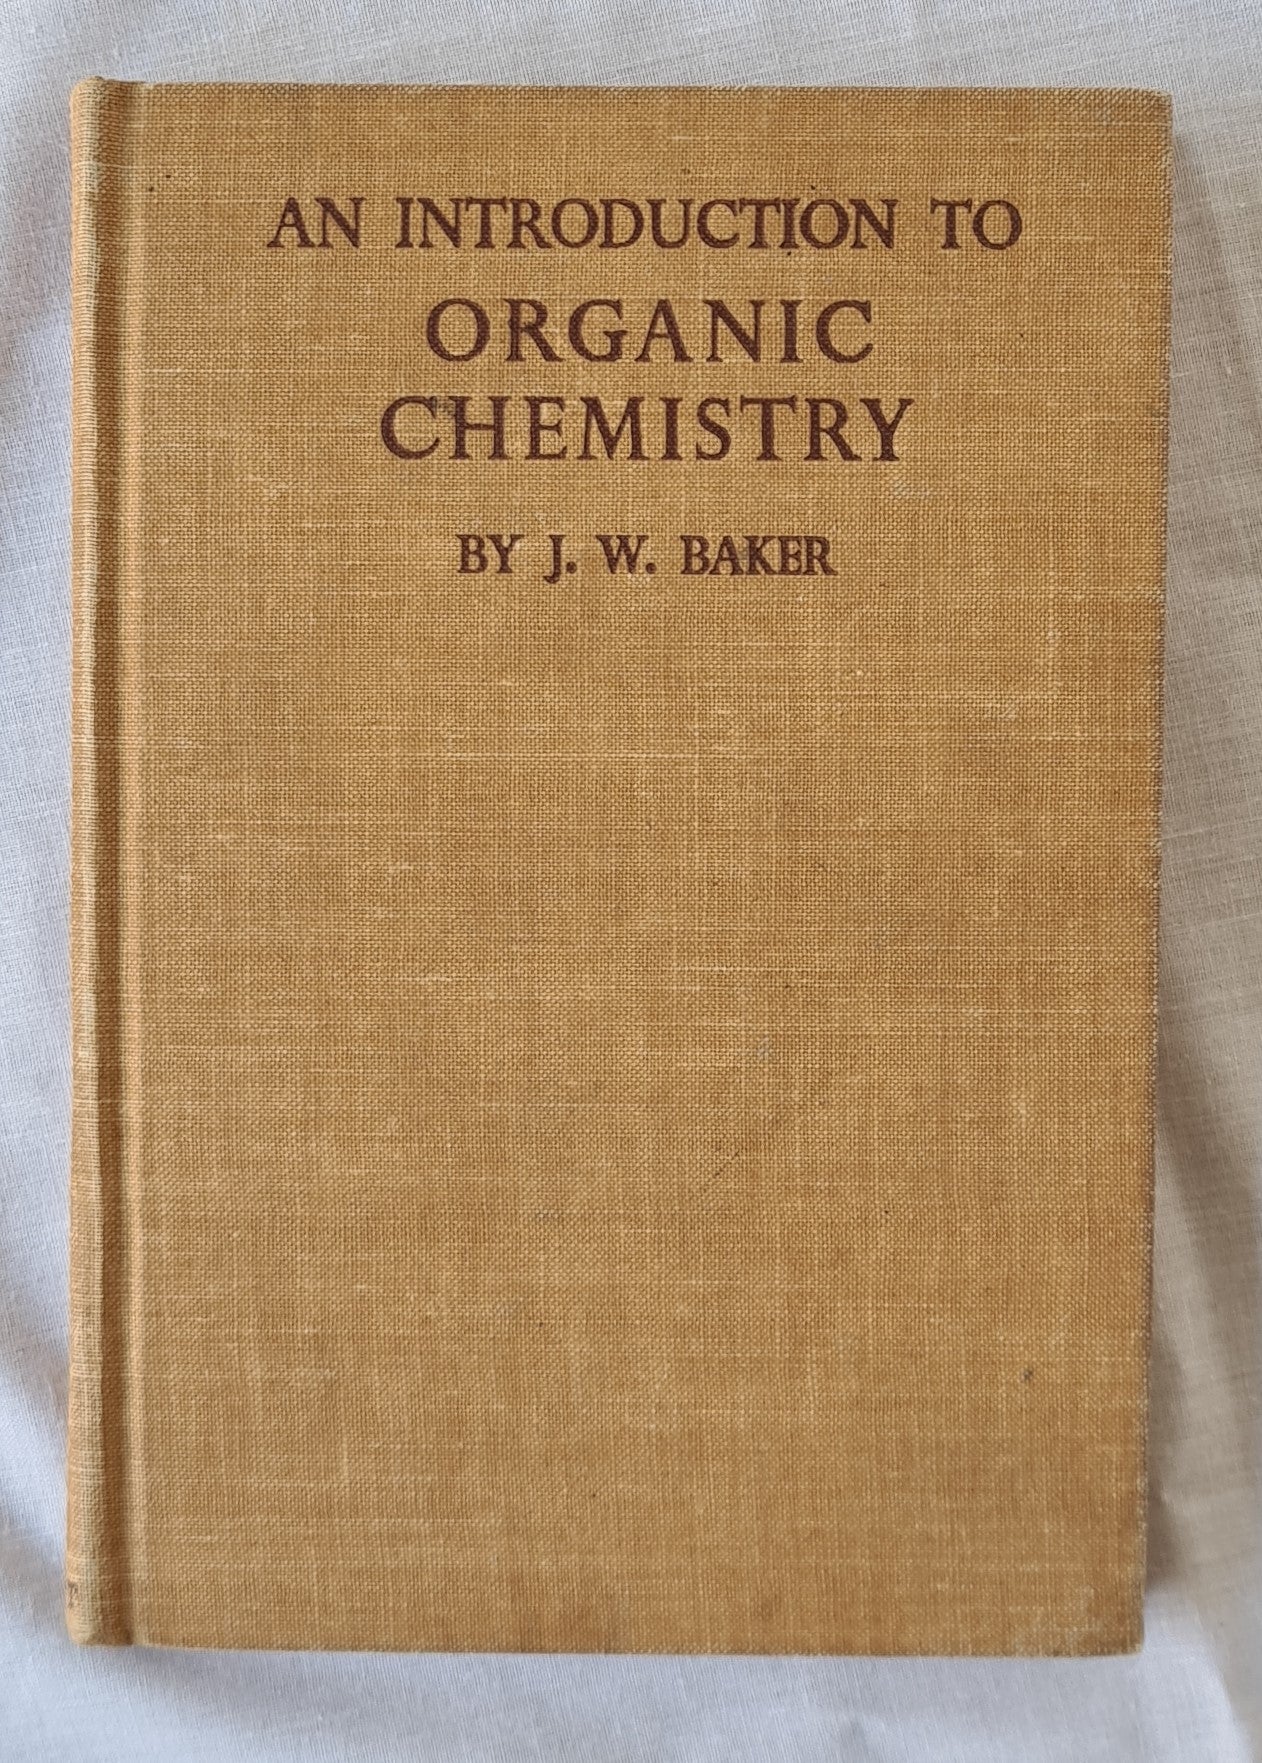 by　–　John　Chemistry　Books　William　Morgan's　to　Rare　An　Baker　Introduction　Organic